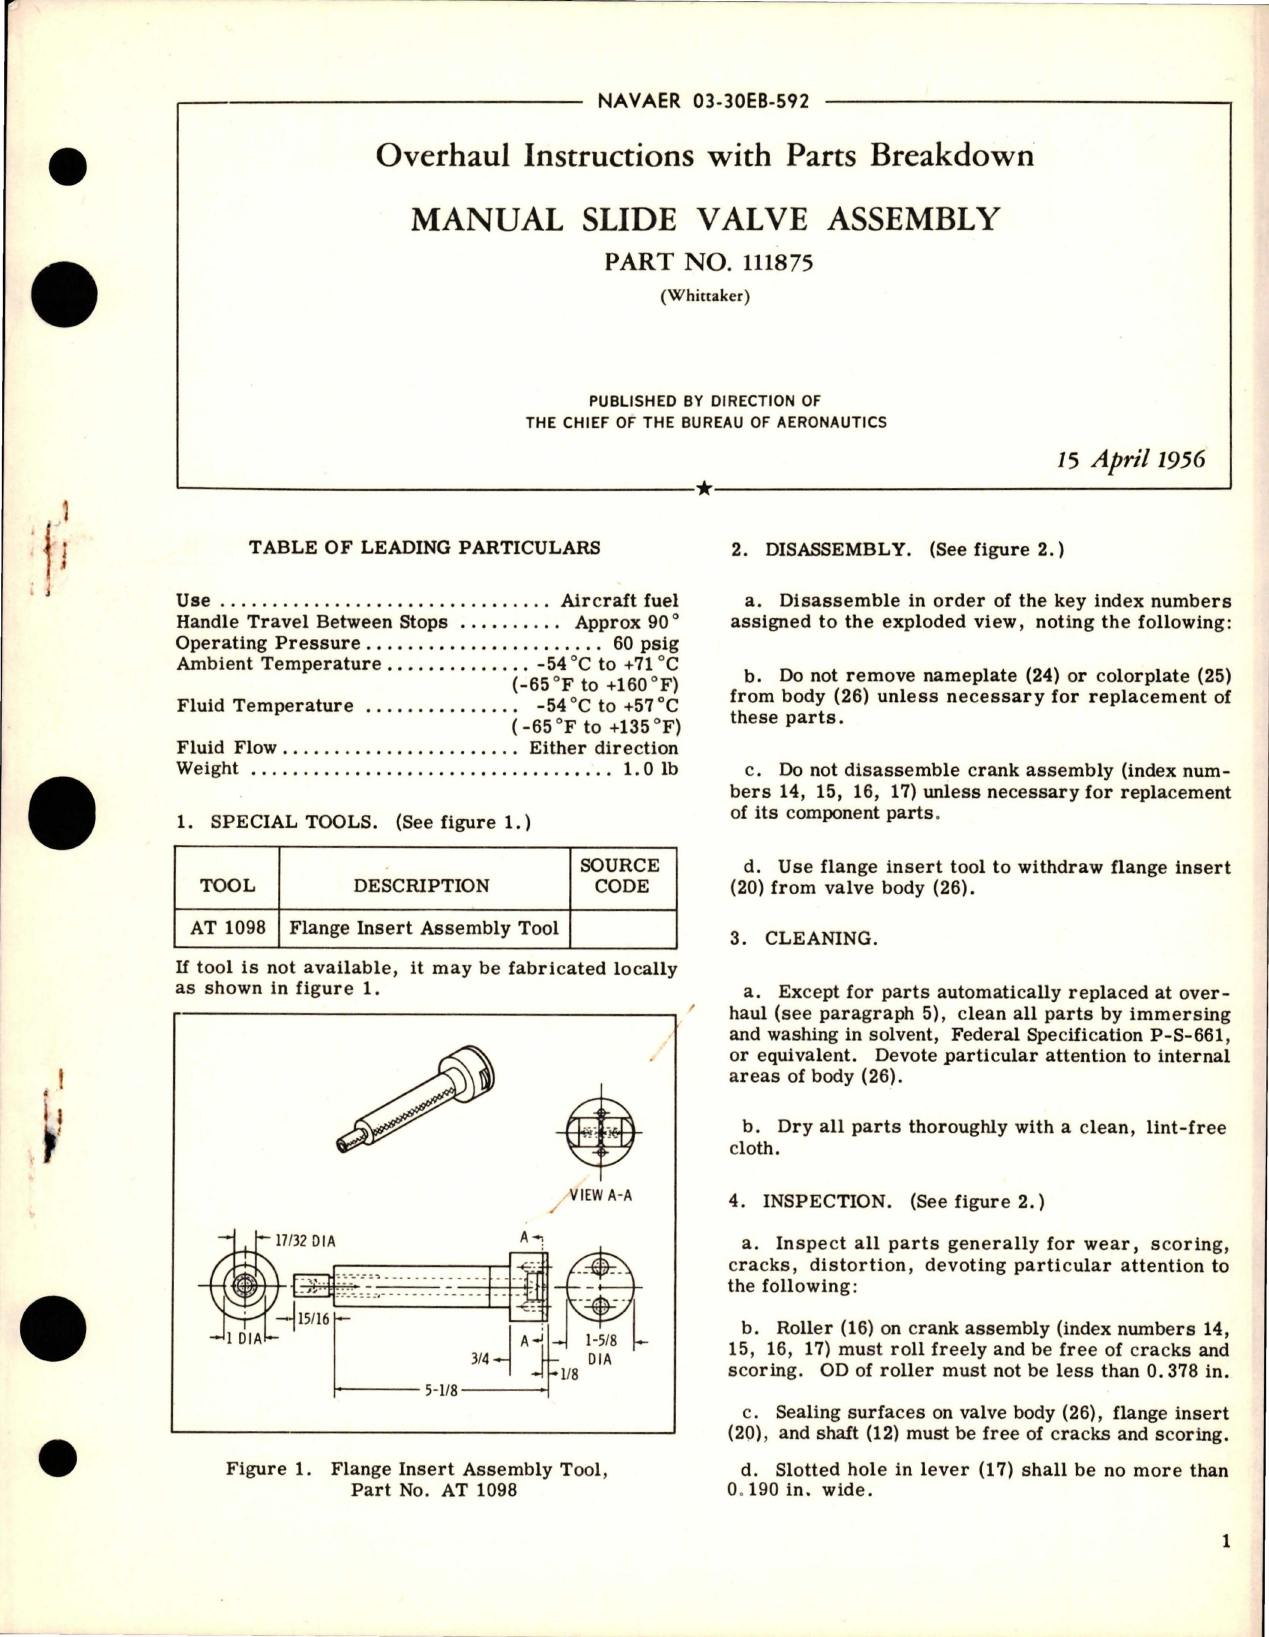 Sample page 1 from AirCorps Library document: Overhaul Instructions with Parts Breakdown for Manual Slide Valve Assy - Part 11875